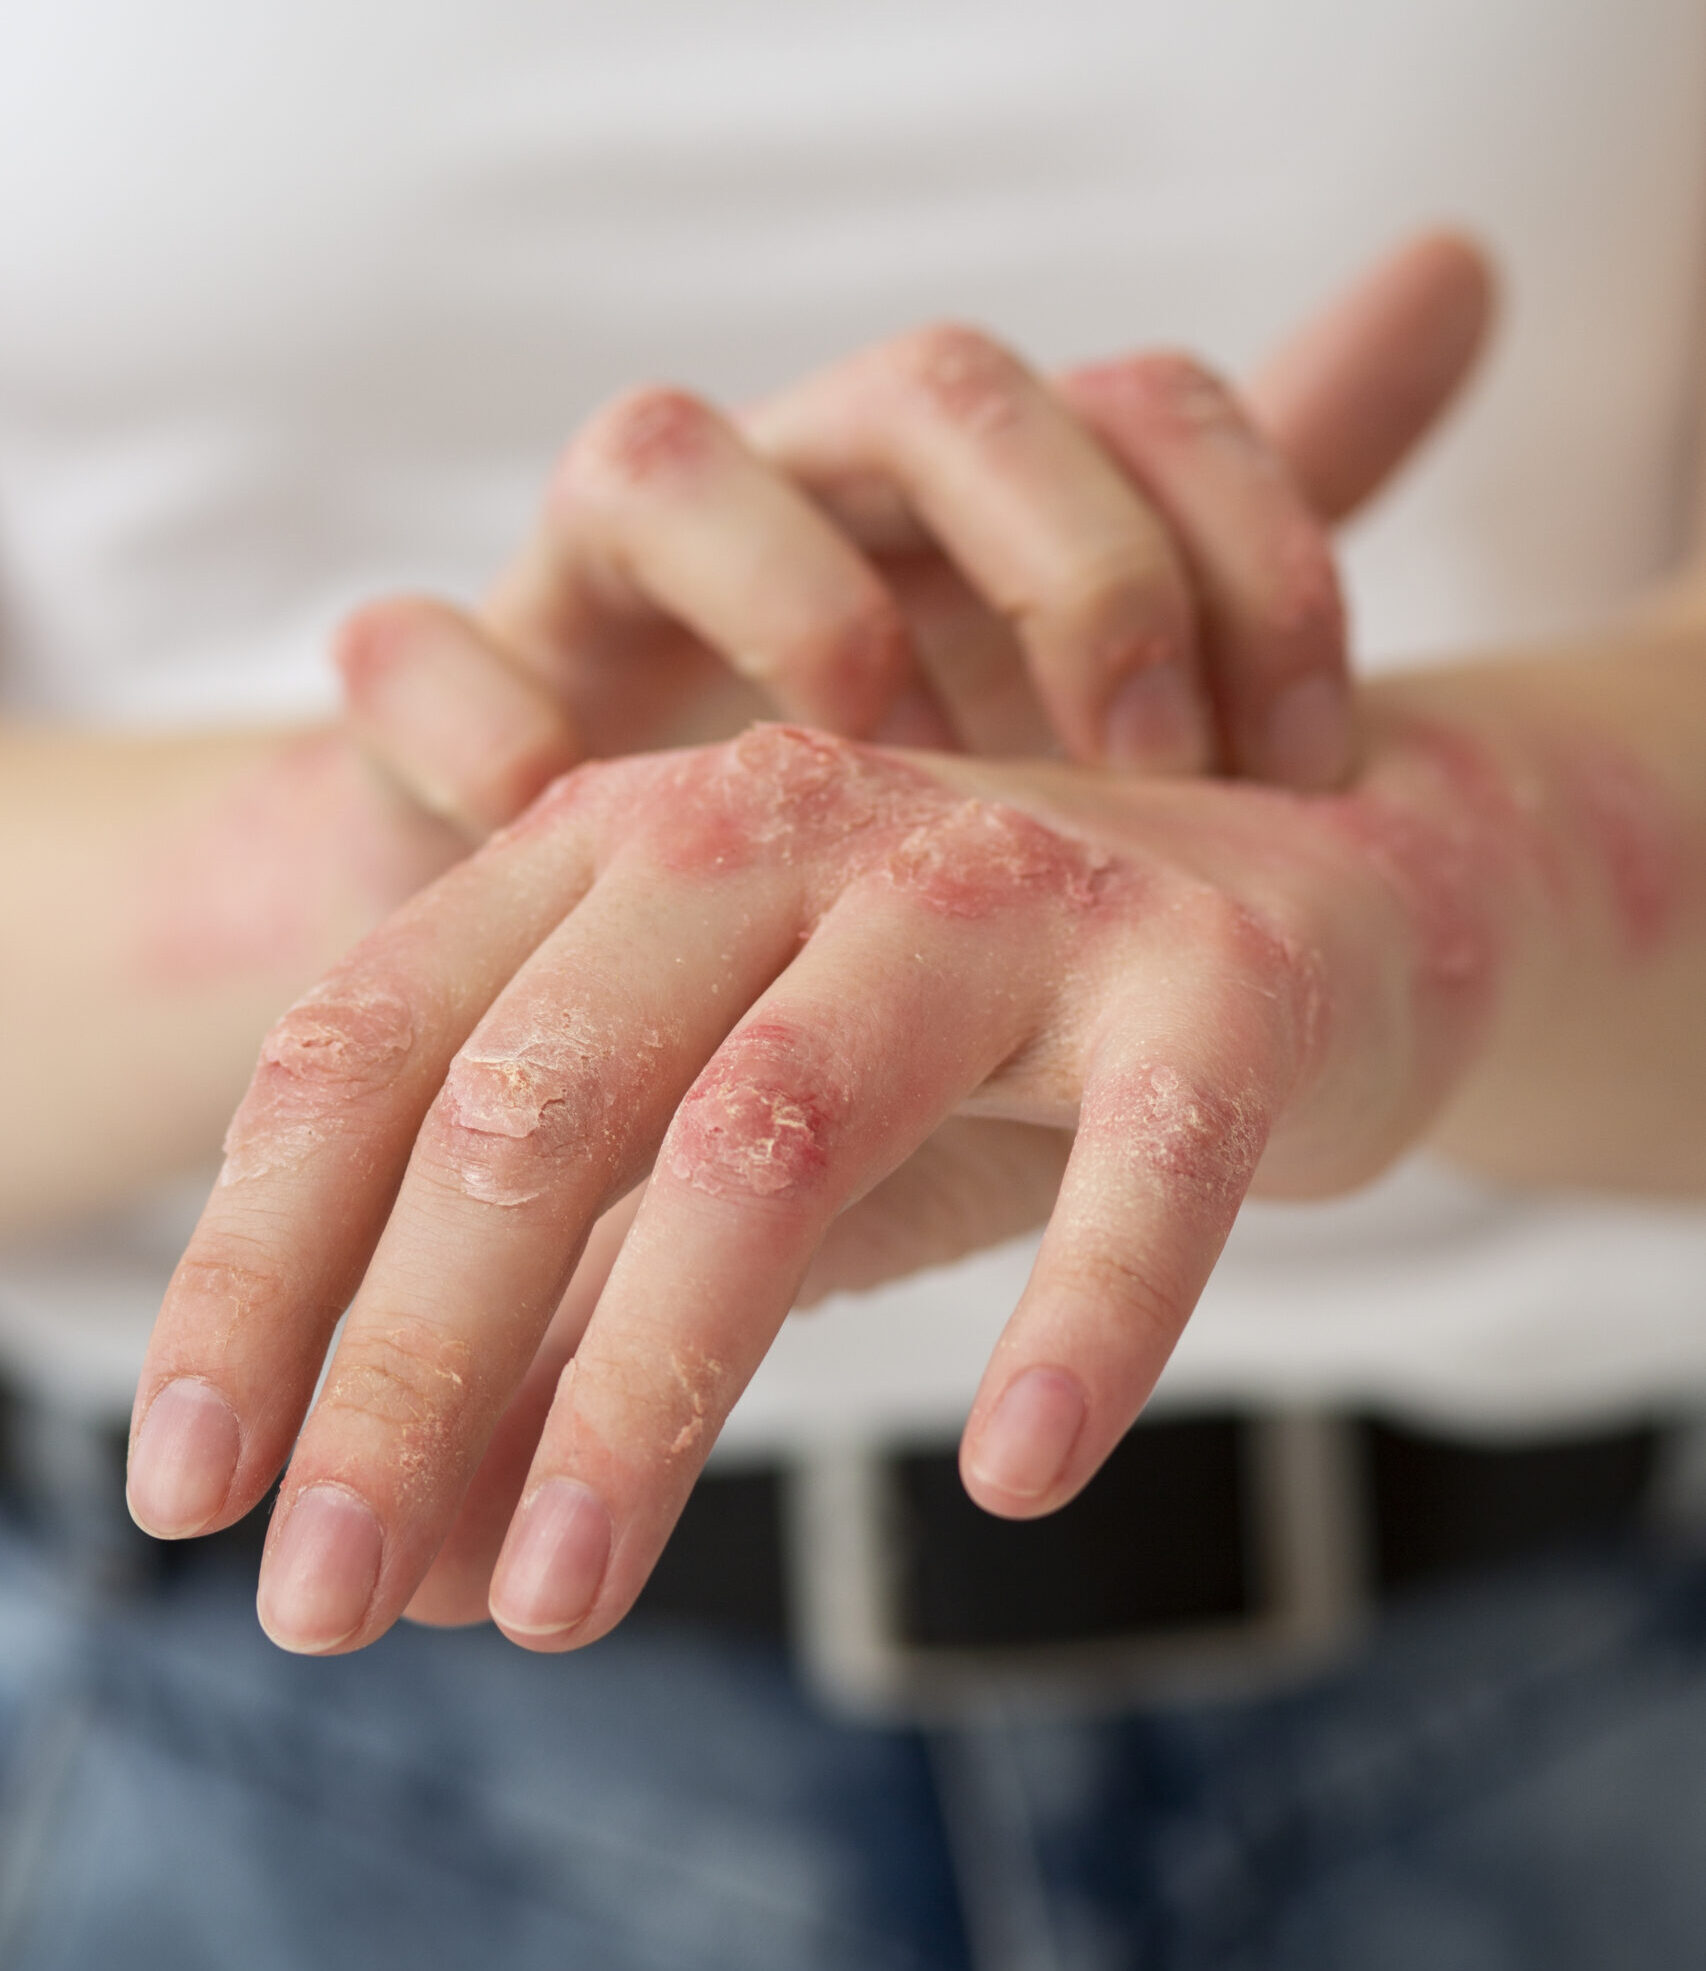 HOMEOPATHIC MEDICINE FOR PSORIASIS